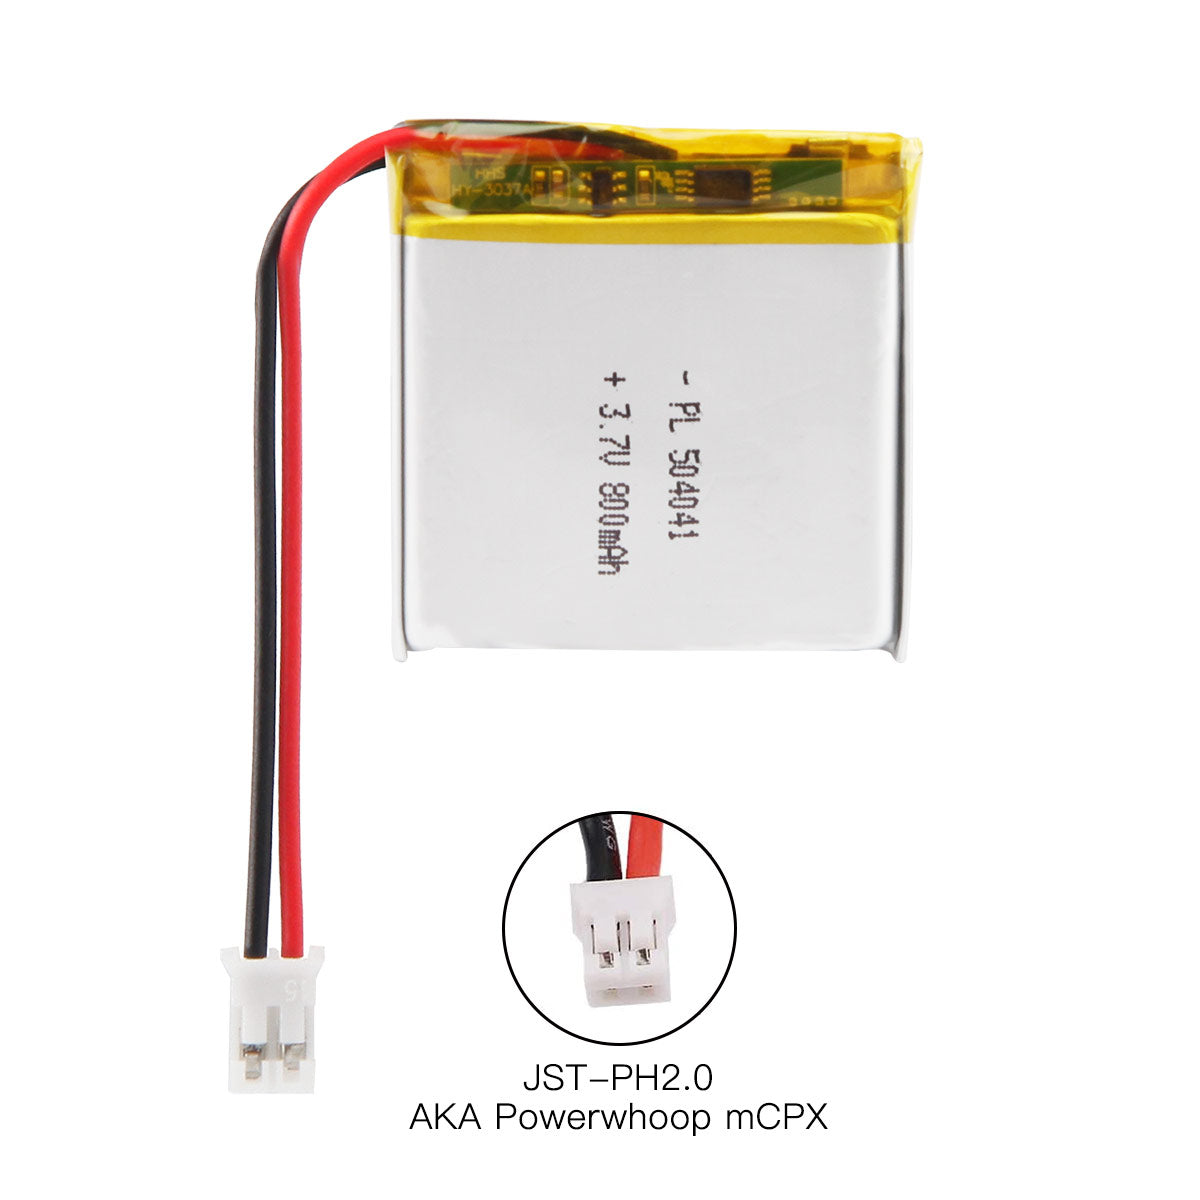 YDL 3.7V 800mAh 504041 Rechargeable Polymer Lithium-Ion Battery Length 43mm